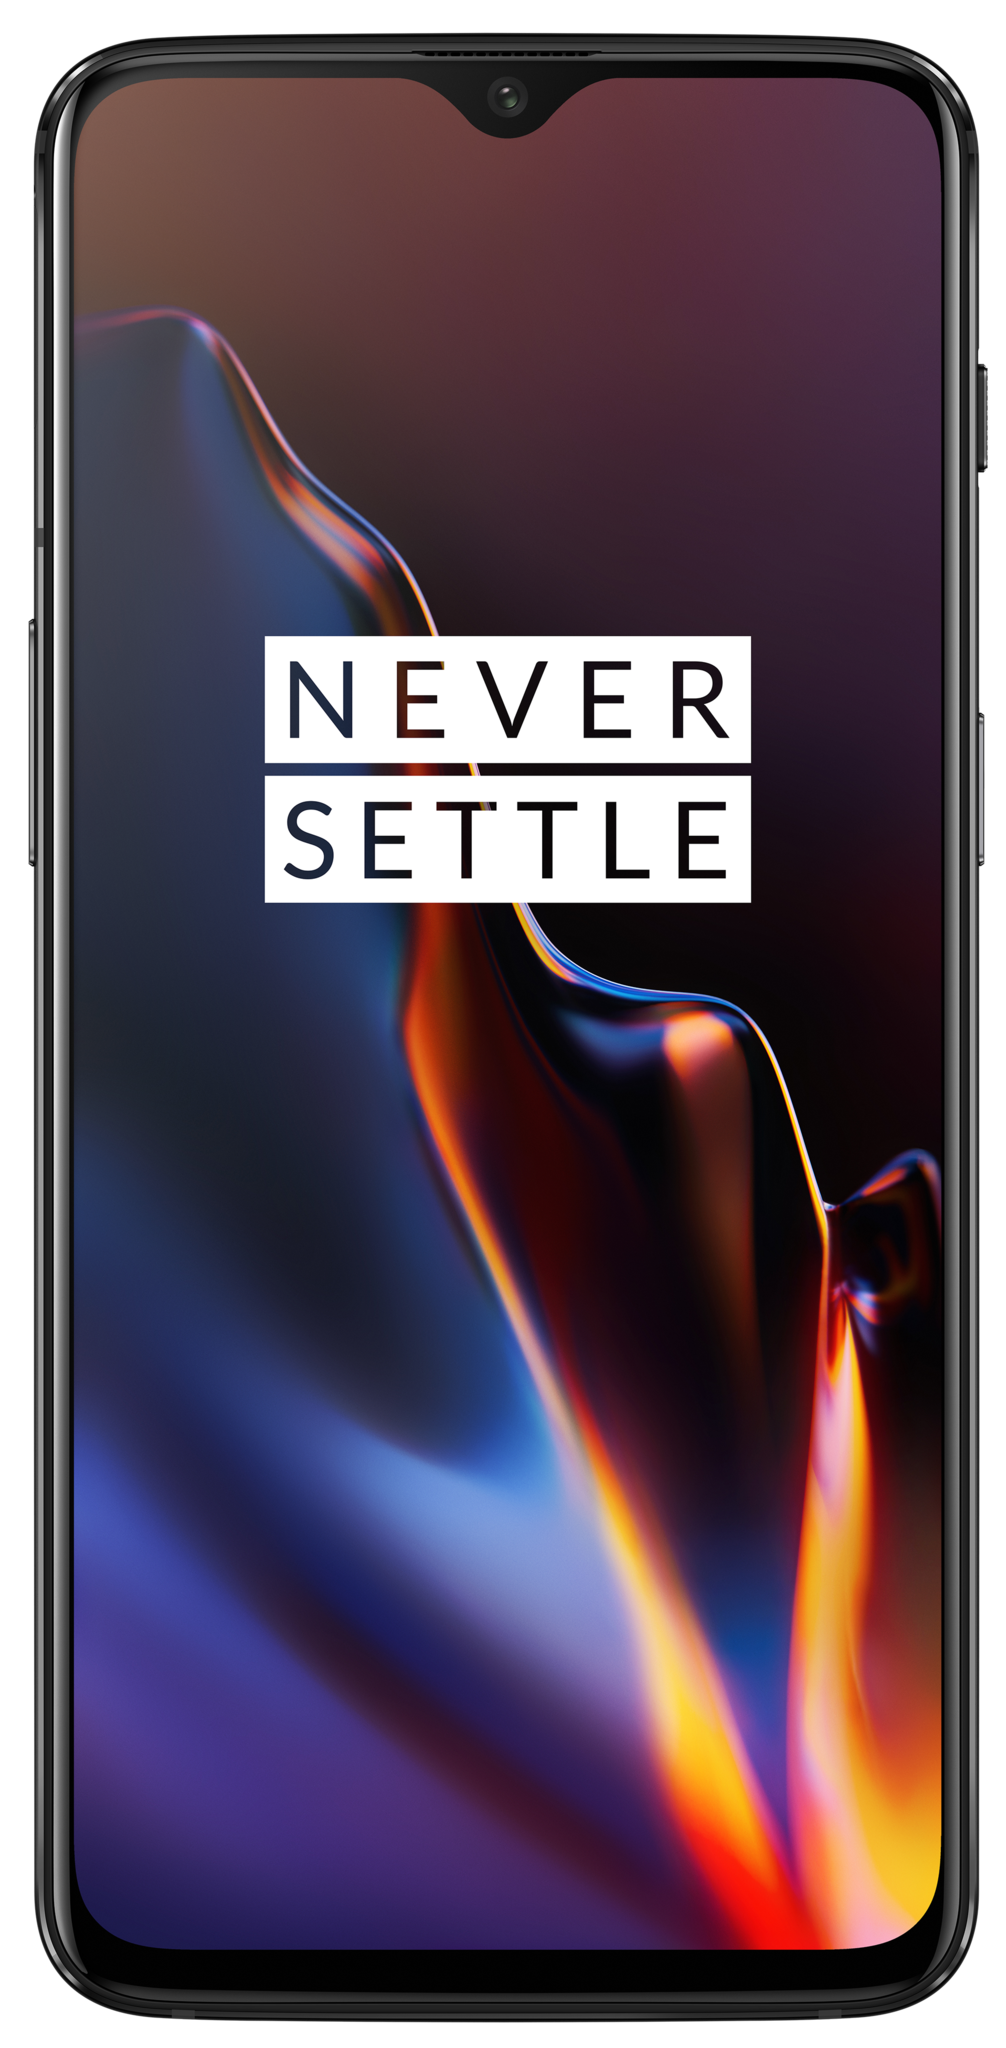 oneplus-6t-render-front.png?itok=TVMaOqV